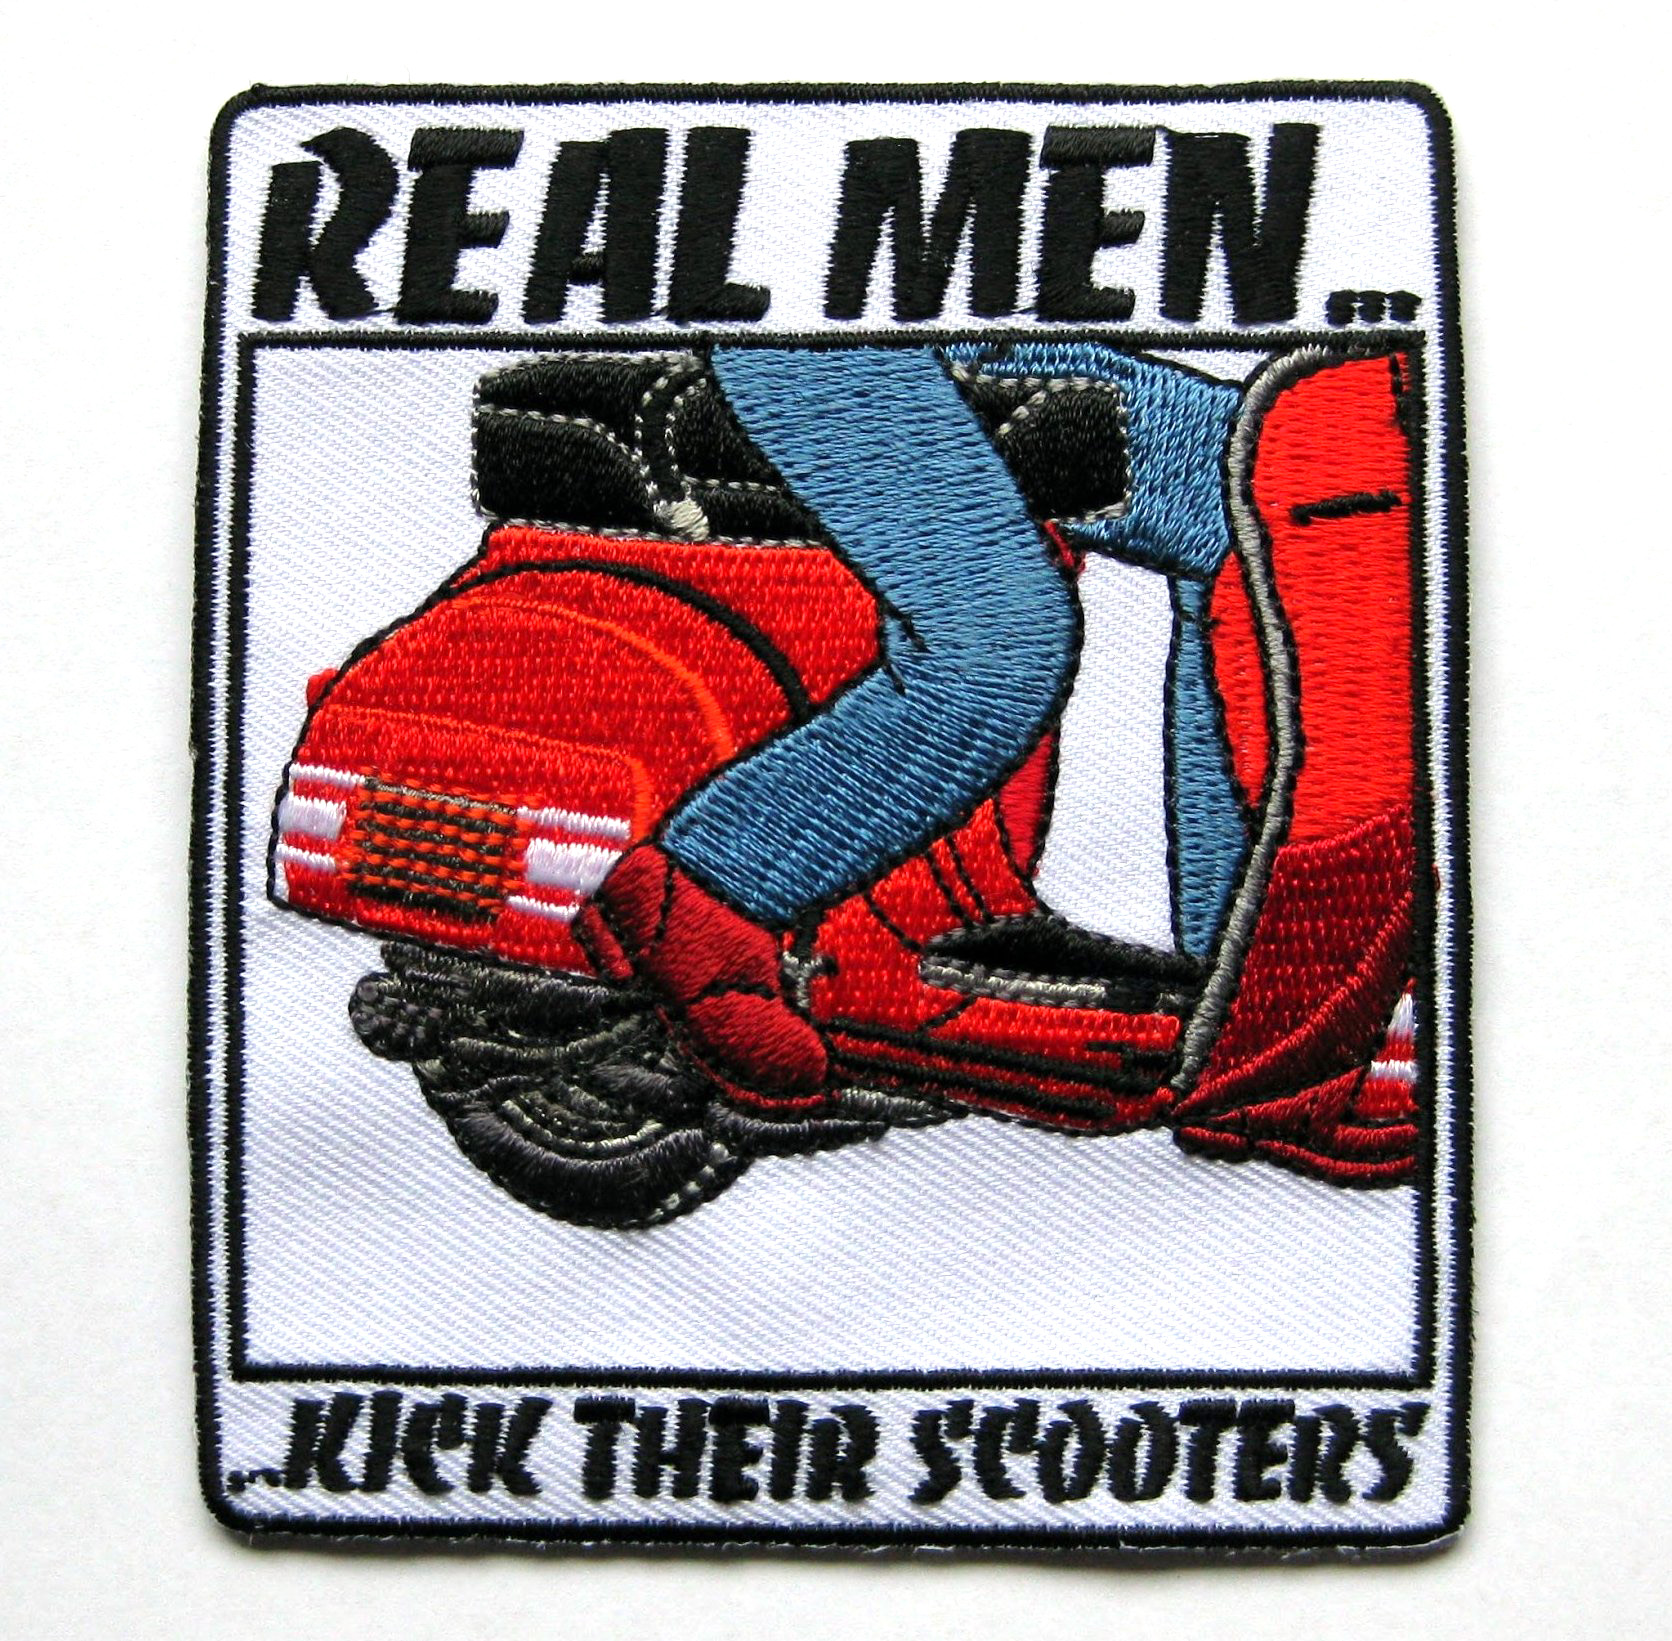 Aufnäher "Real Man kick their Scooters", 90x80mm